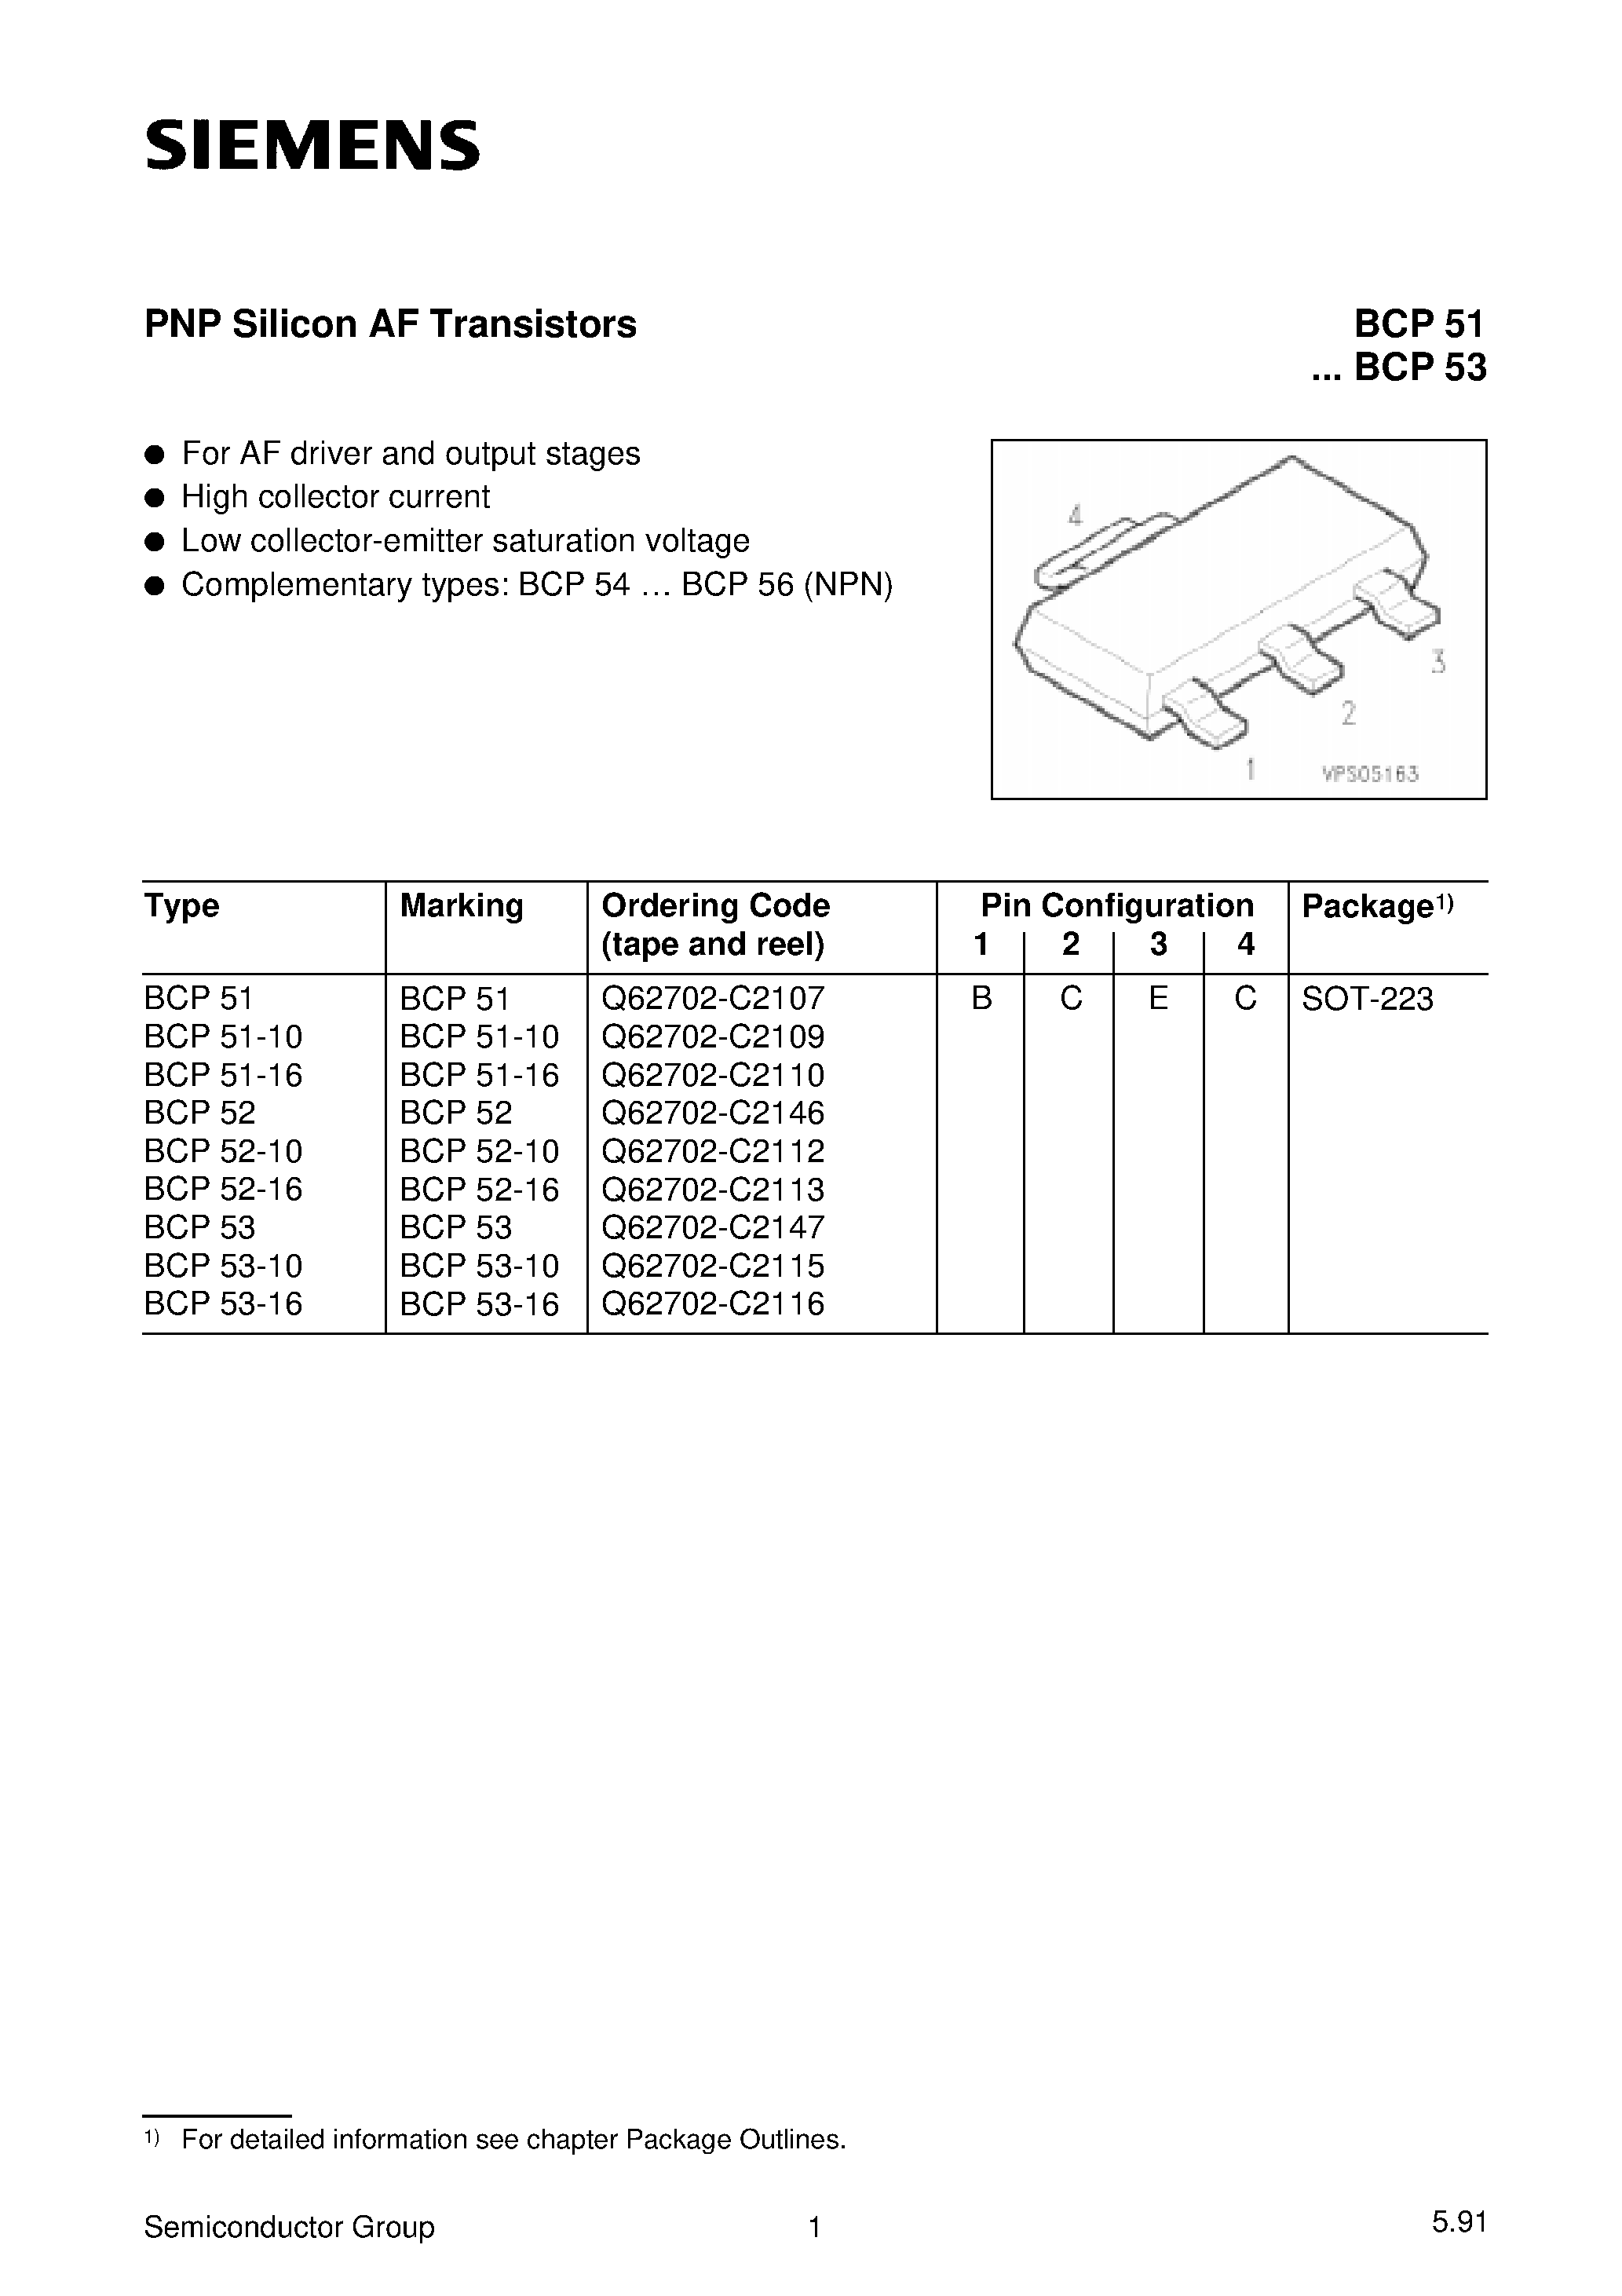 Datasheet BCP52 - PNP Silicon AF Transistors (For AF driver and output stages High collector current) page 1